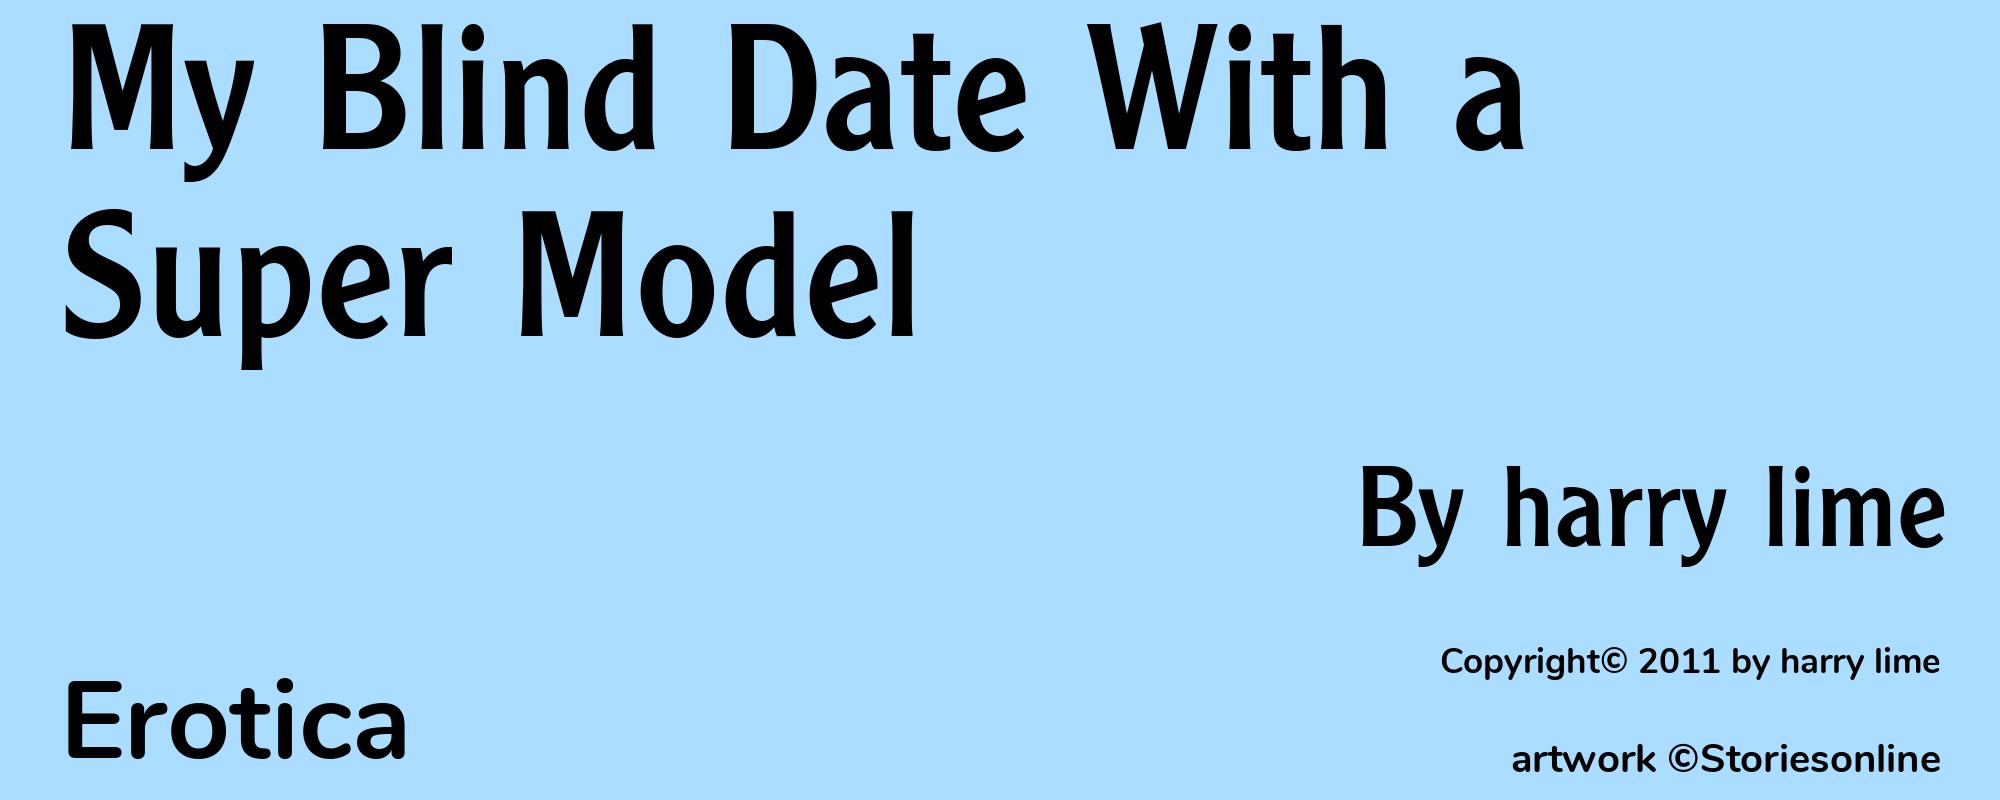 My Blind Date With a Super Model - Cover